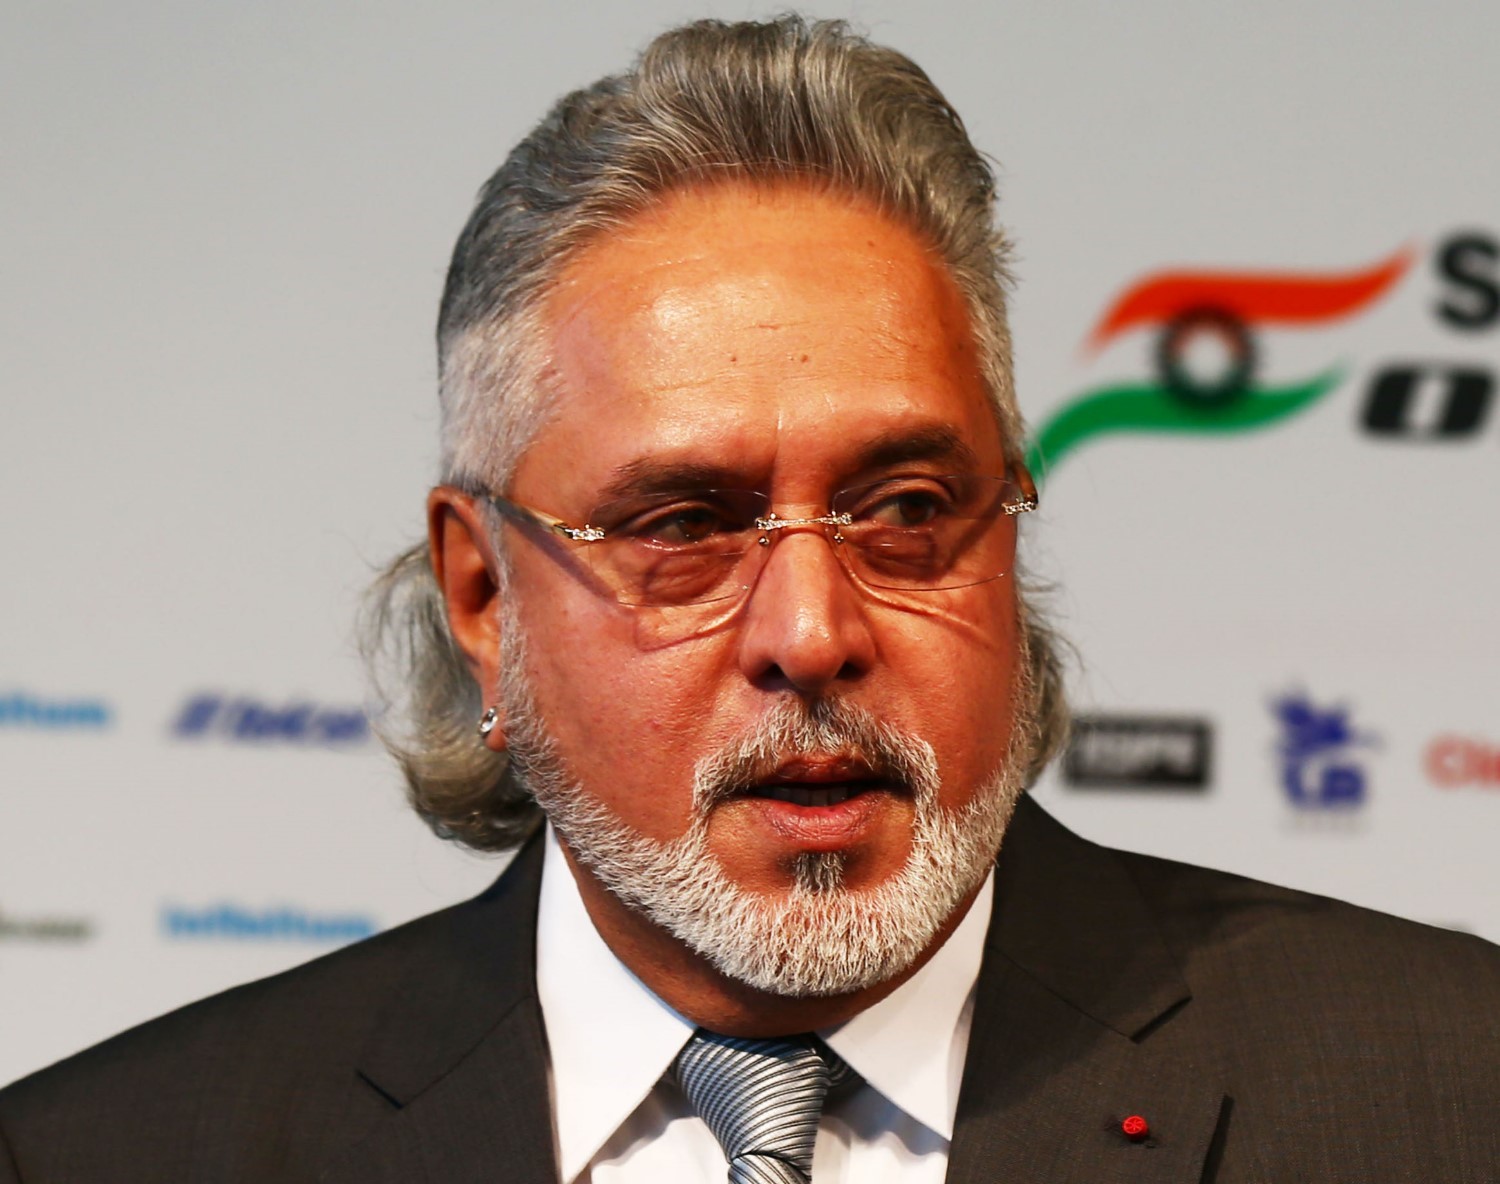 One Force India owner is already in jail and the other, Vijay Mallya, will be if he returns to India.